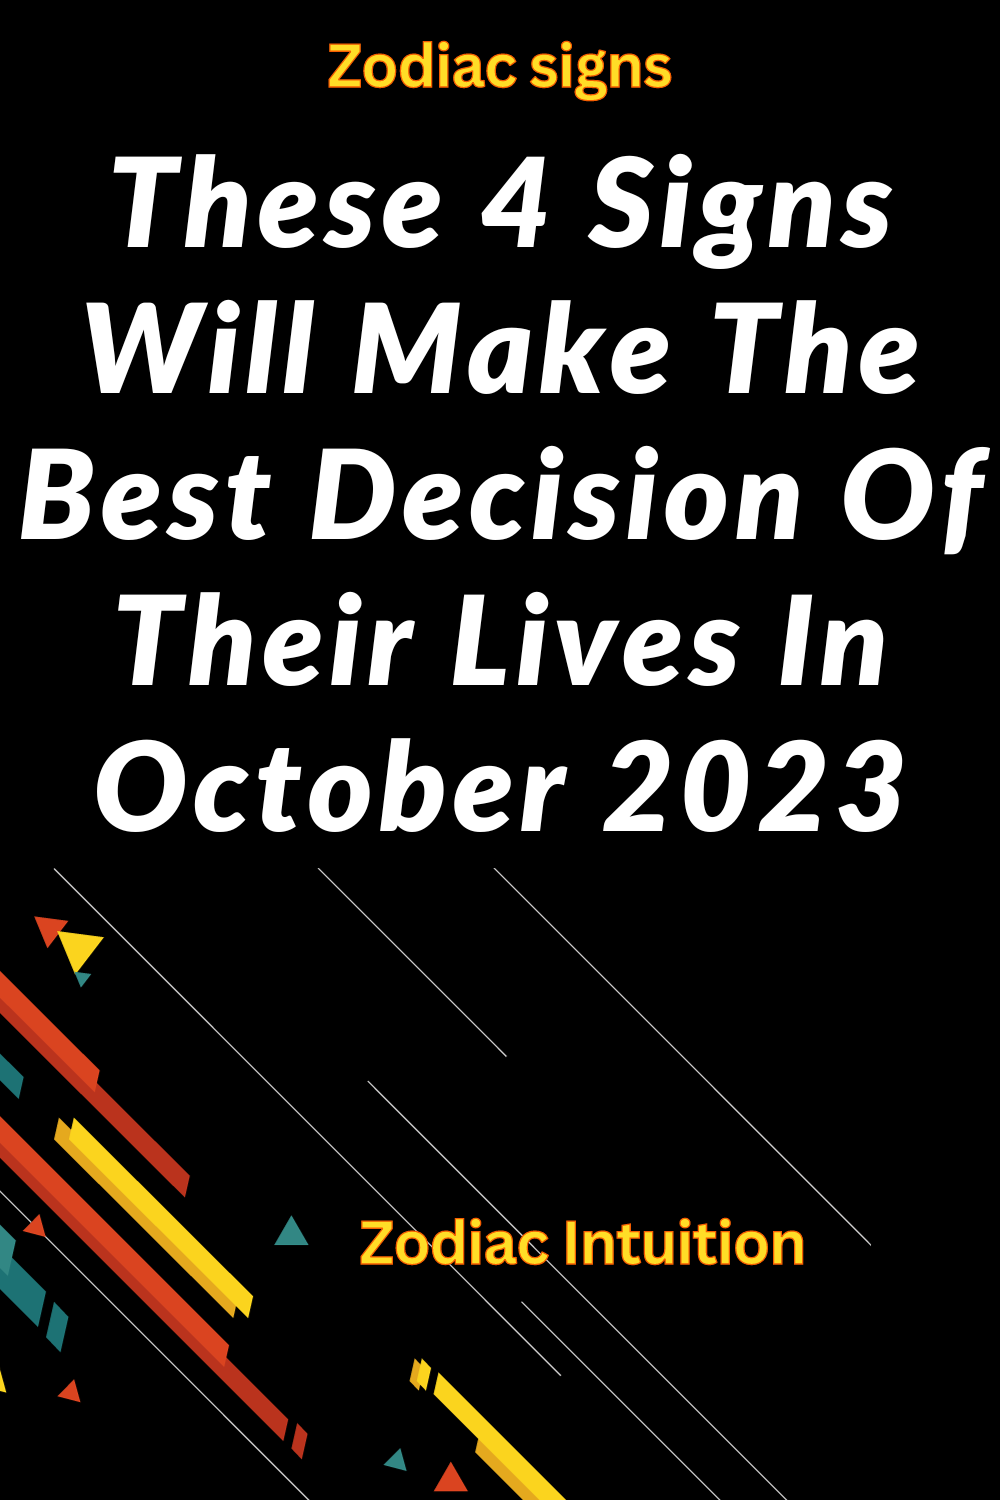 These 4 Signs Will Make The Best Decision Of Their Lives In October 2023